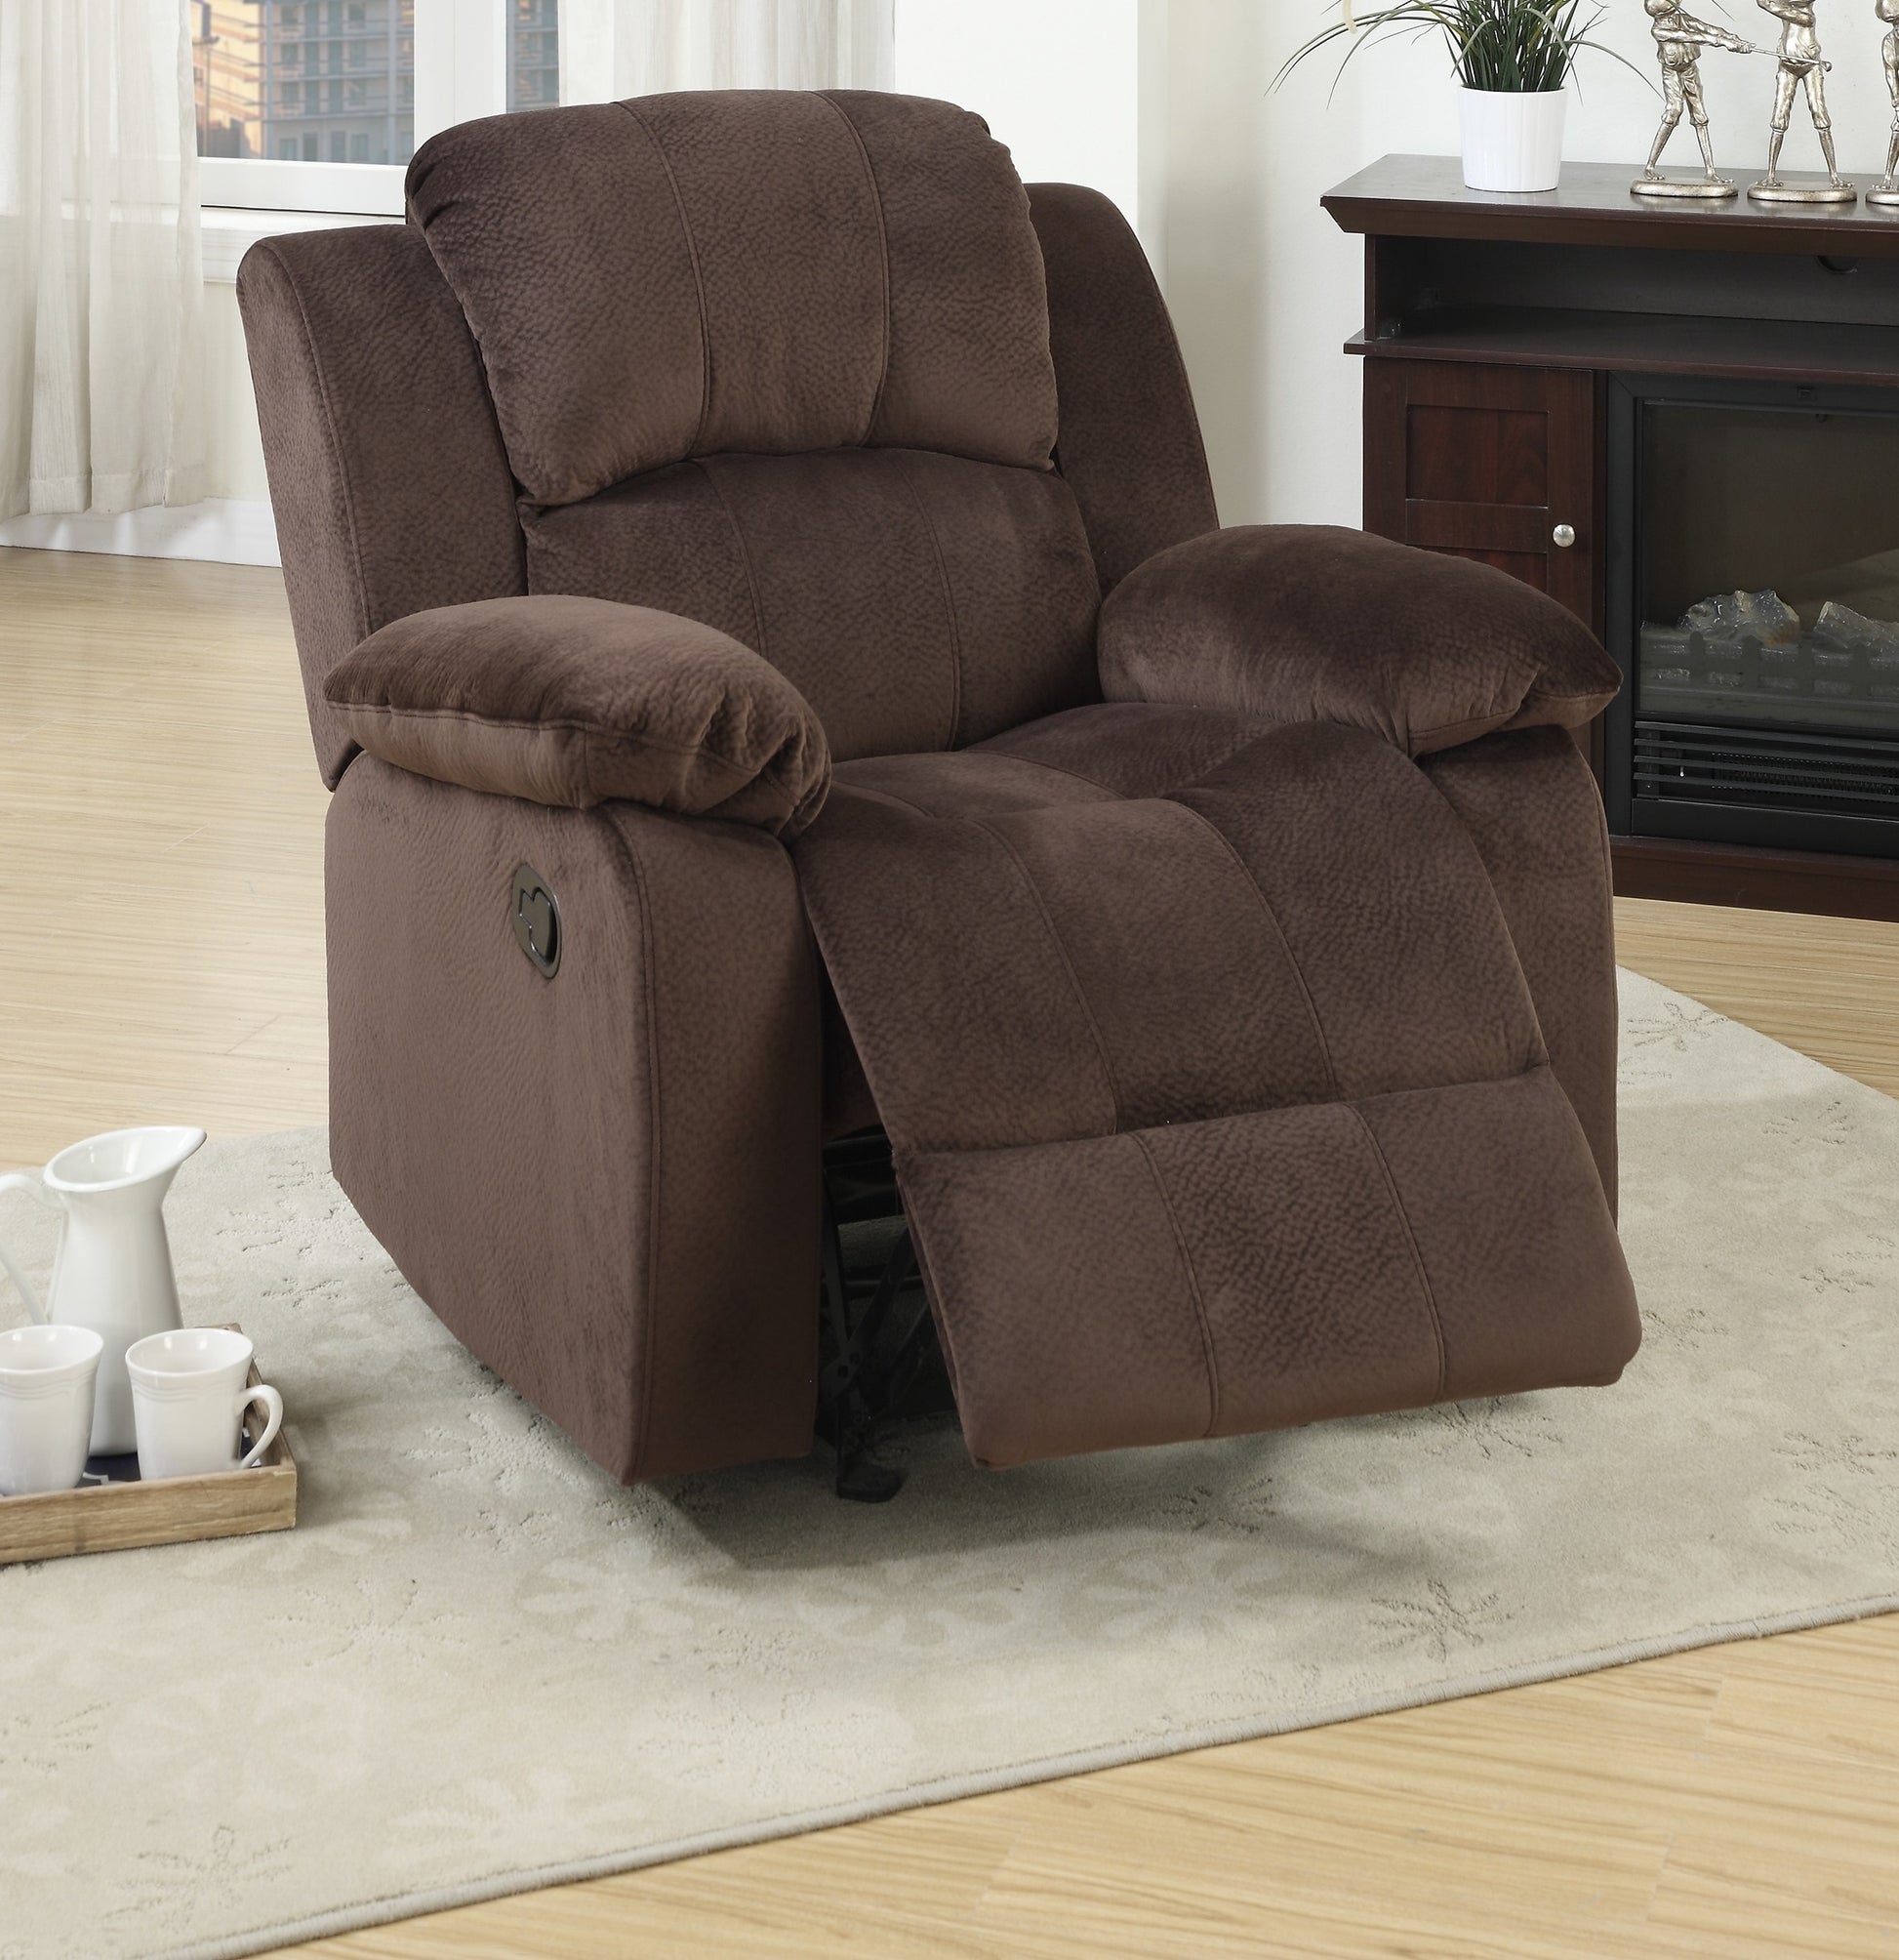 Motion Recliner Chair 1pc Rocker Recliner Couch Living brown-primary living